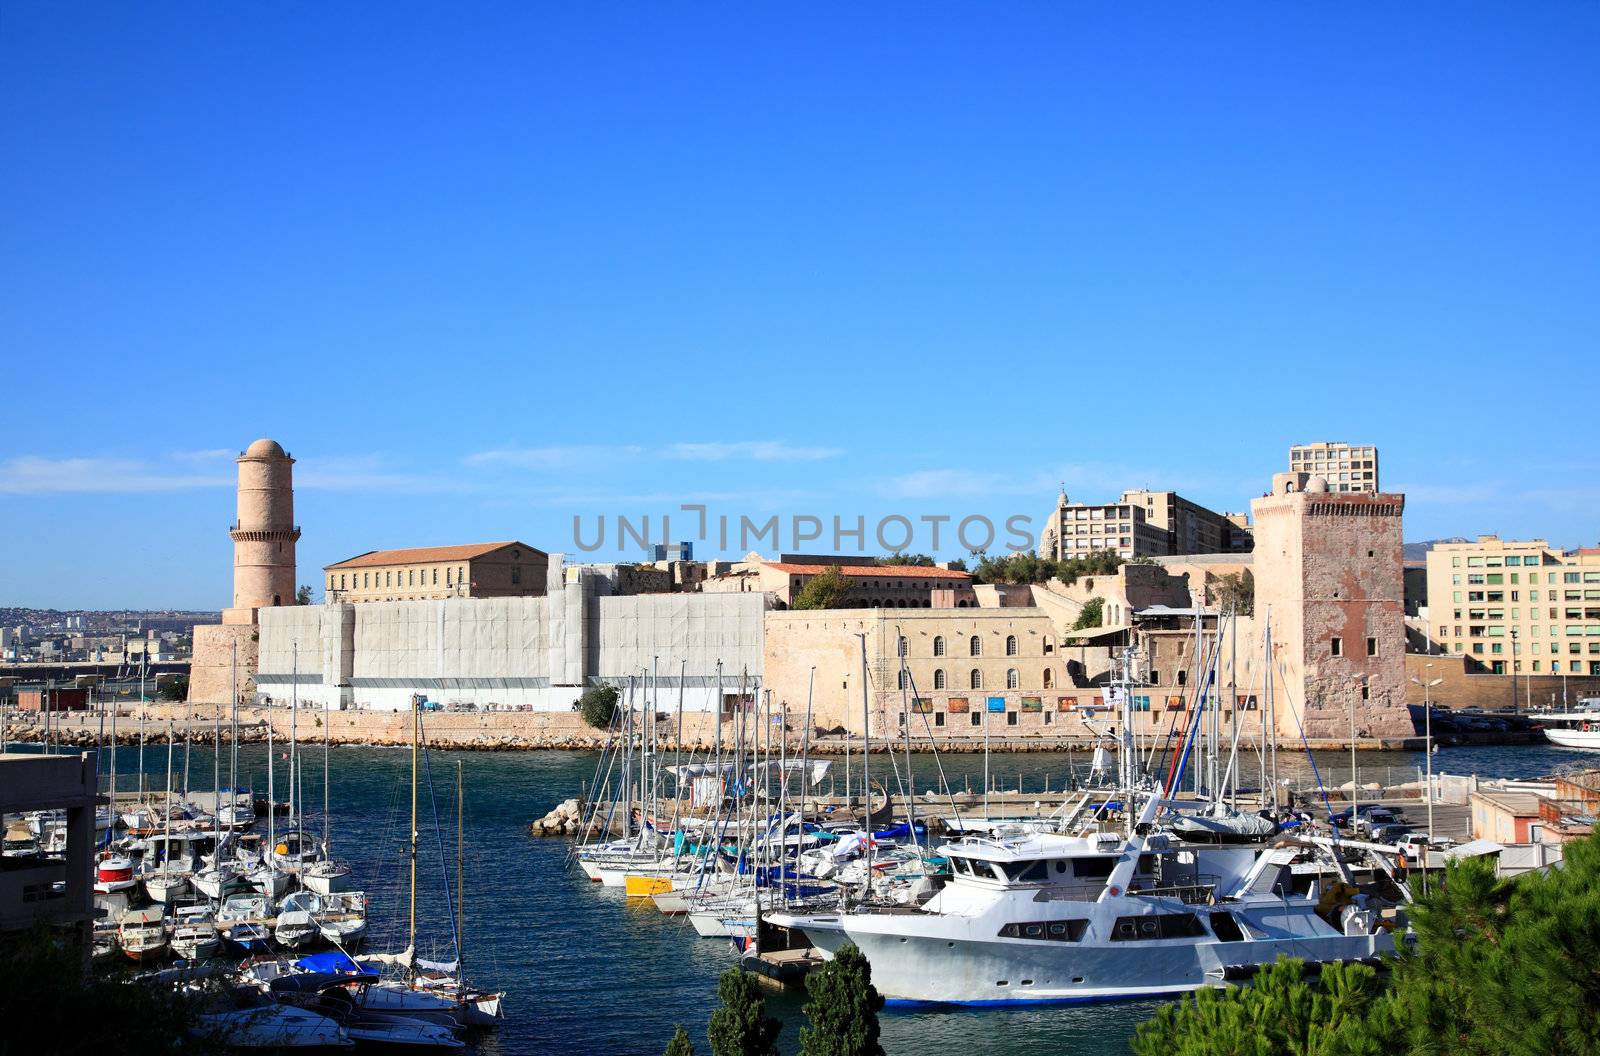 The Fort Saint-Jean in Marseille by gary718